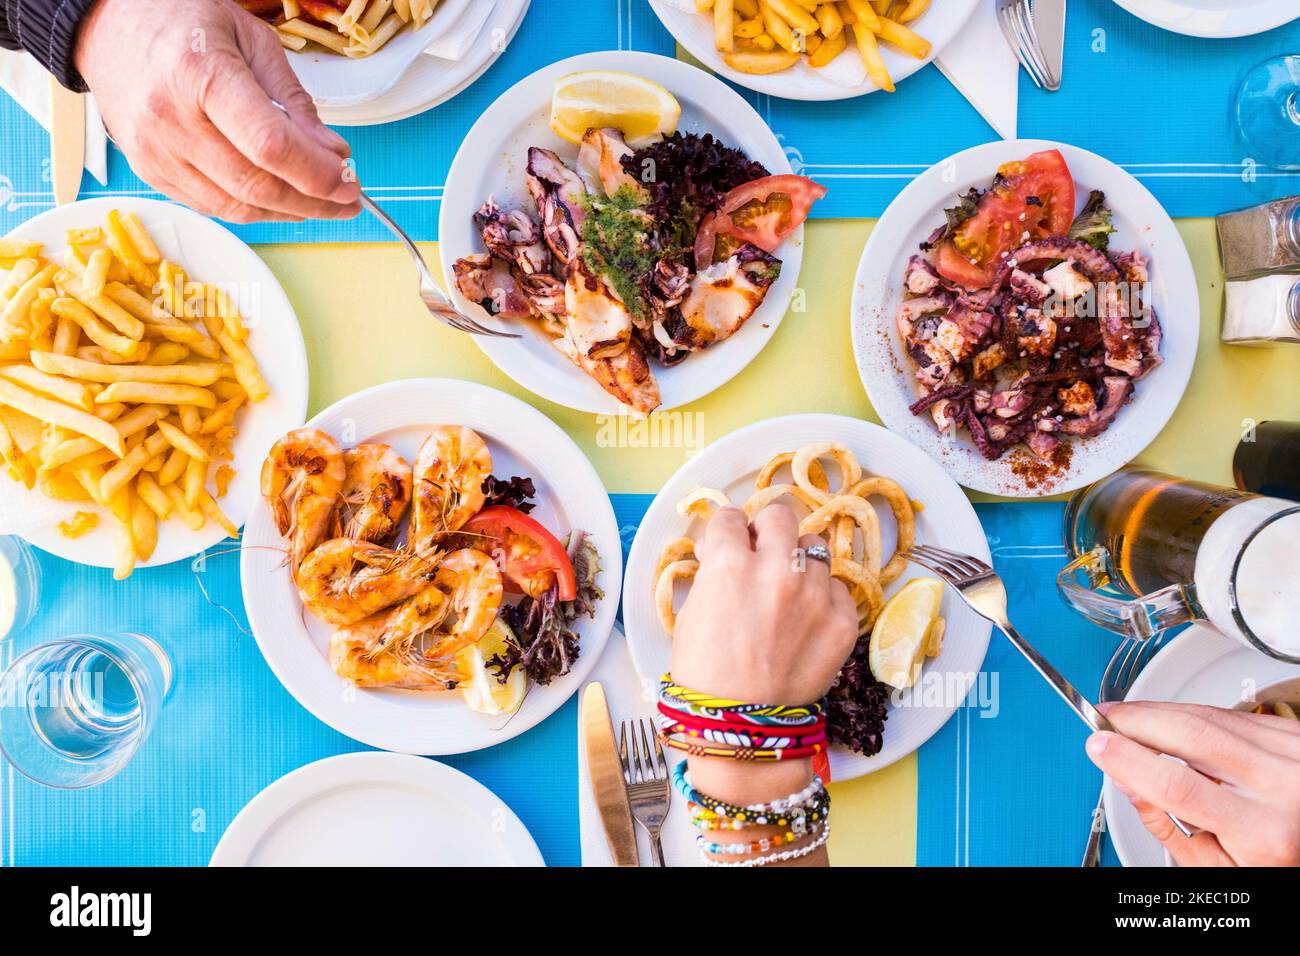 group of people eating and drinking together - eat fish and healthy food - table with plate with food Stock Photo